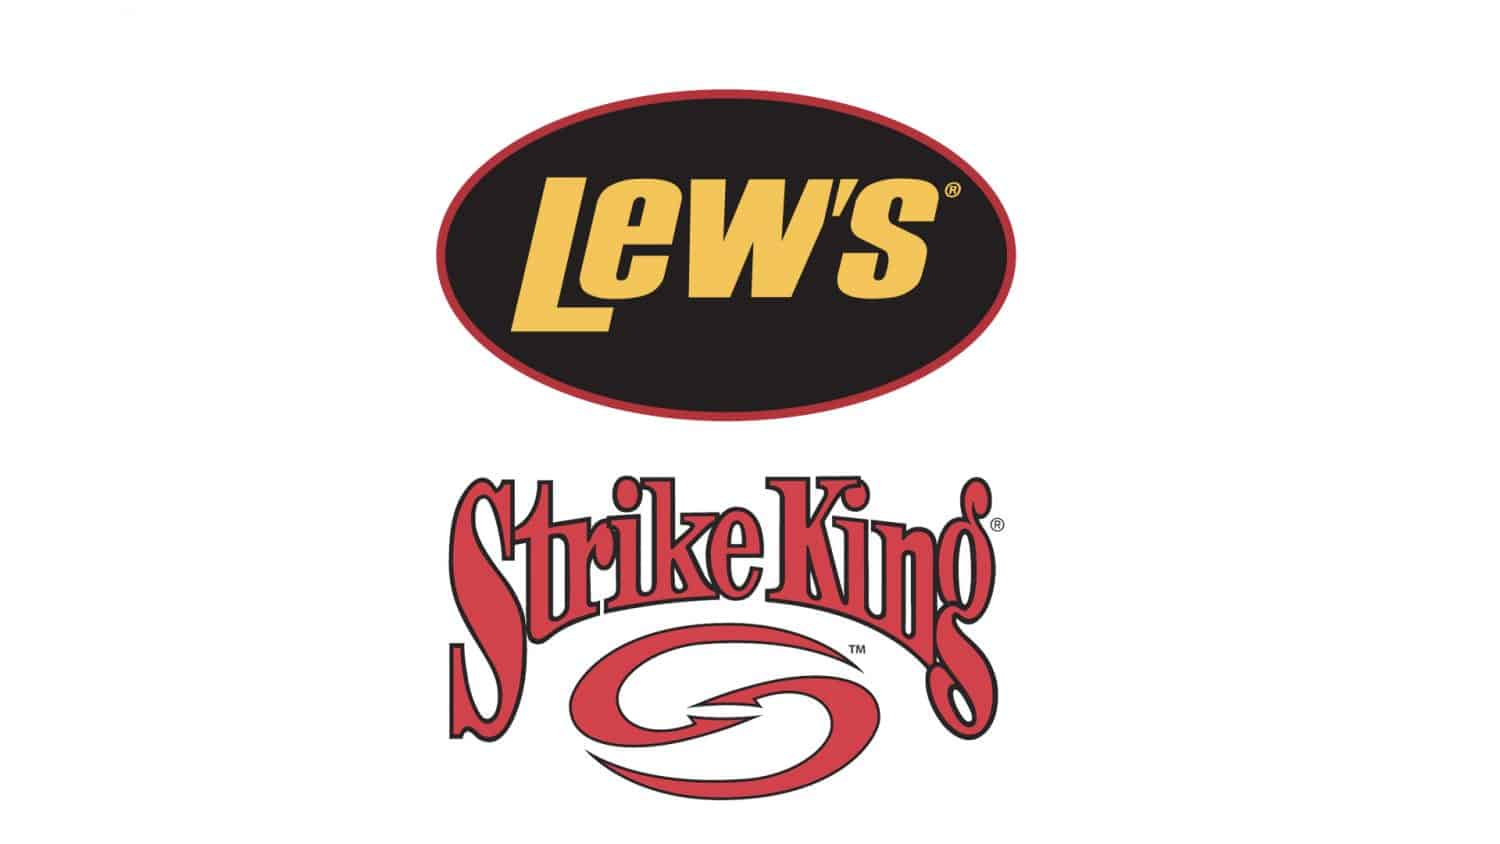 Lew's and Strike King sold to New Ownership Group – Anglers Channel